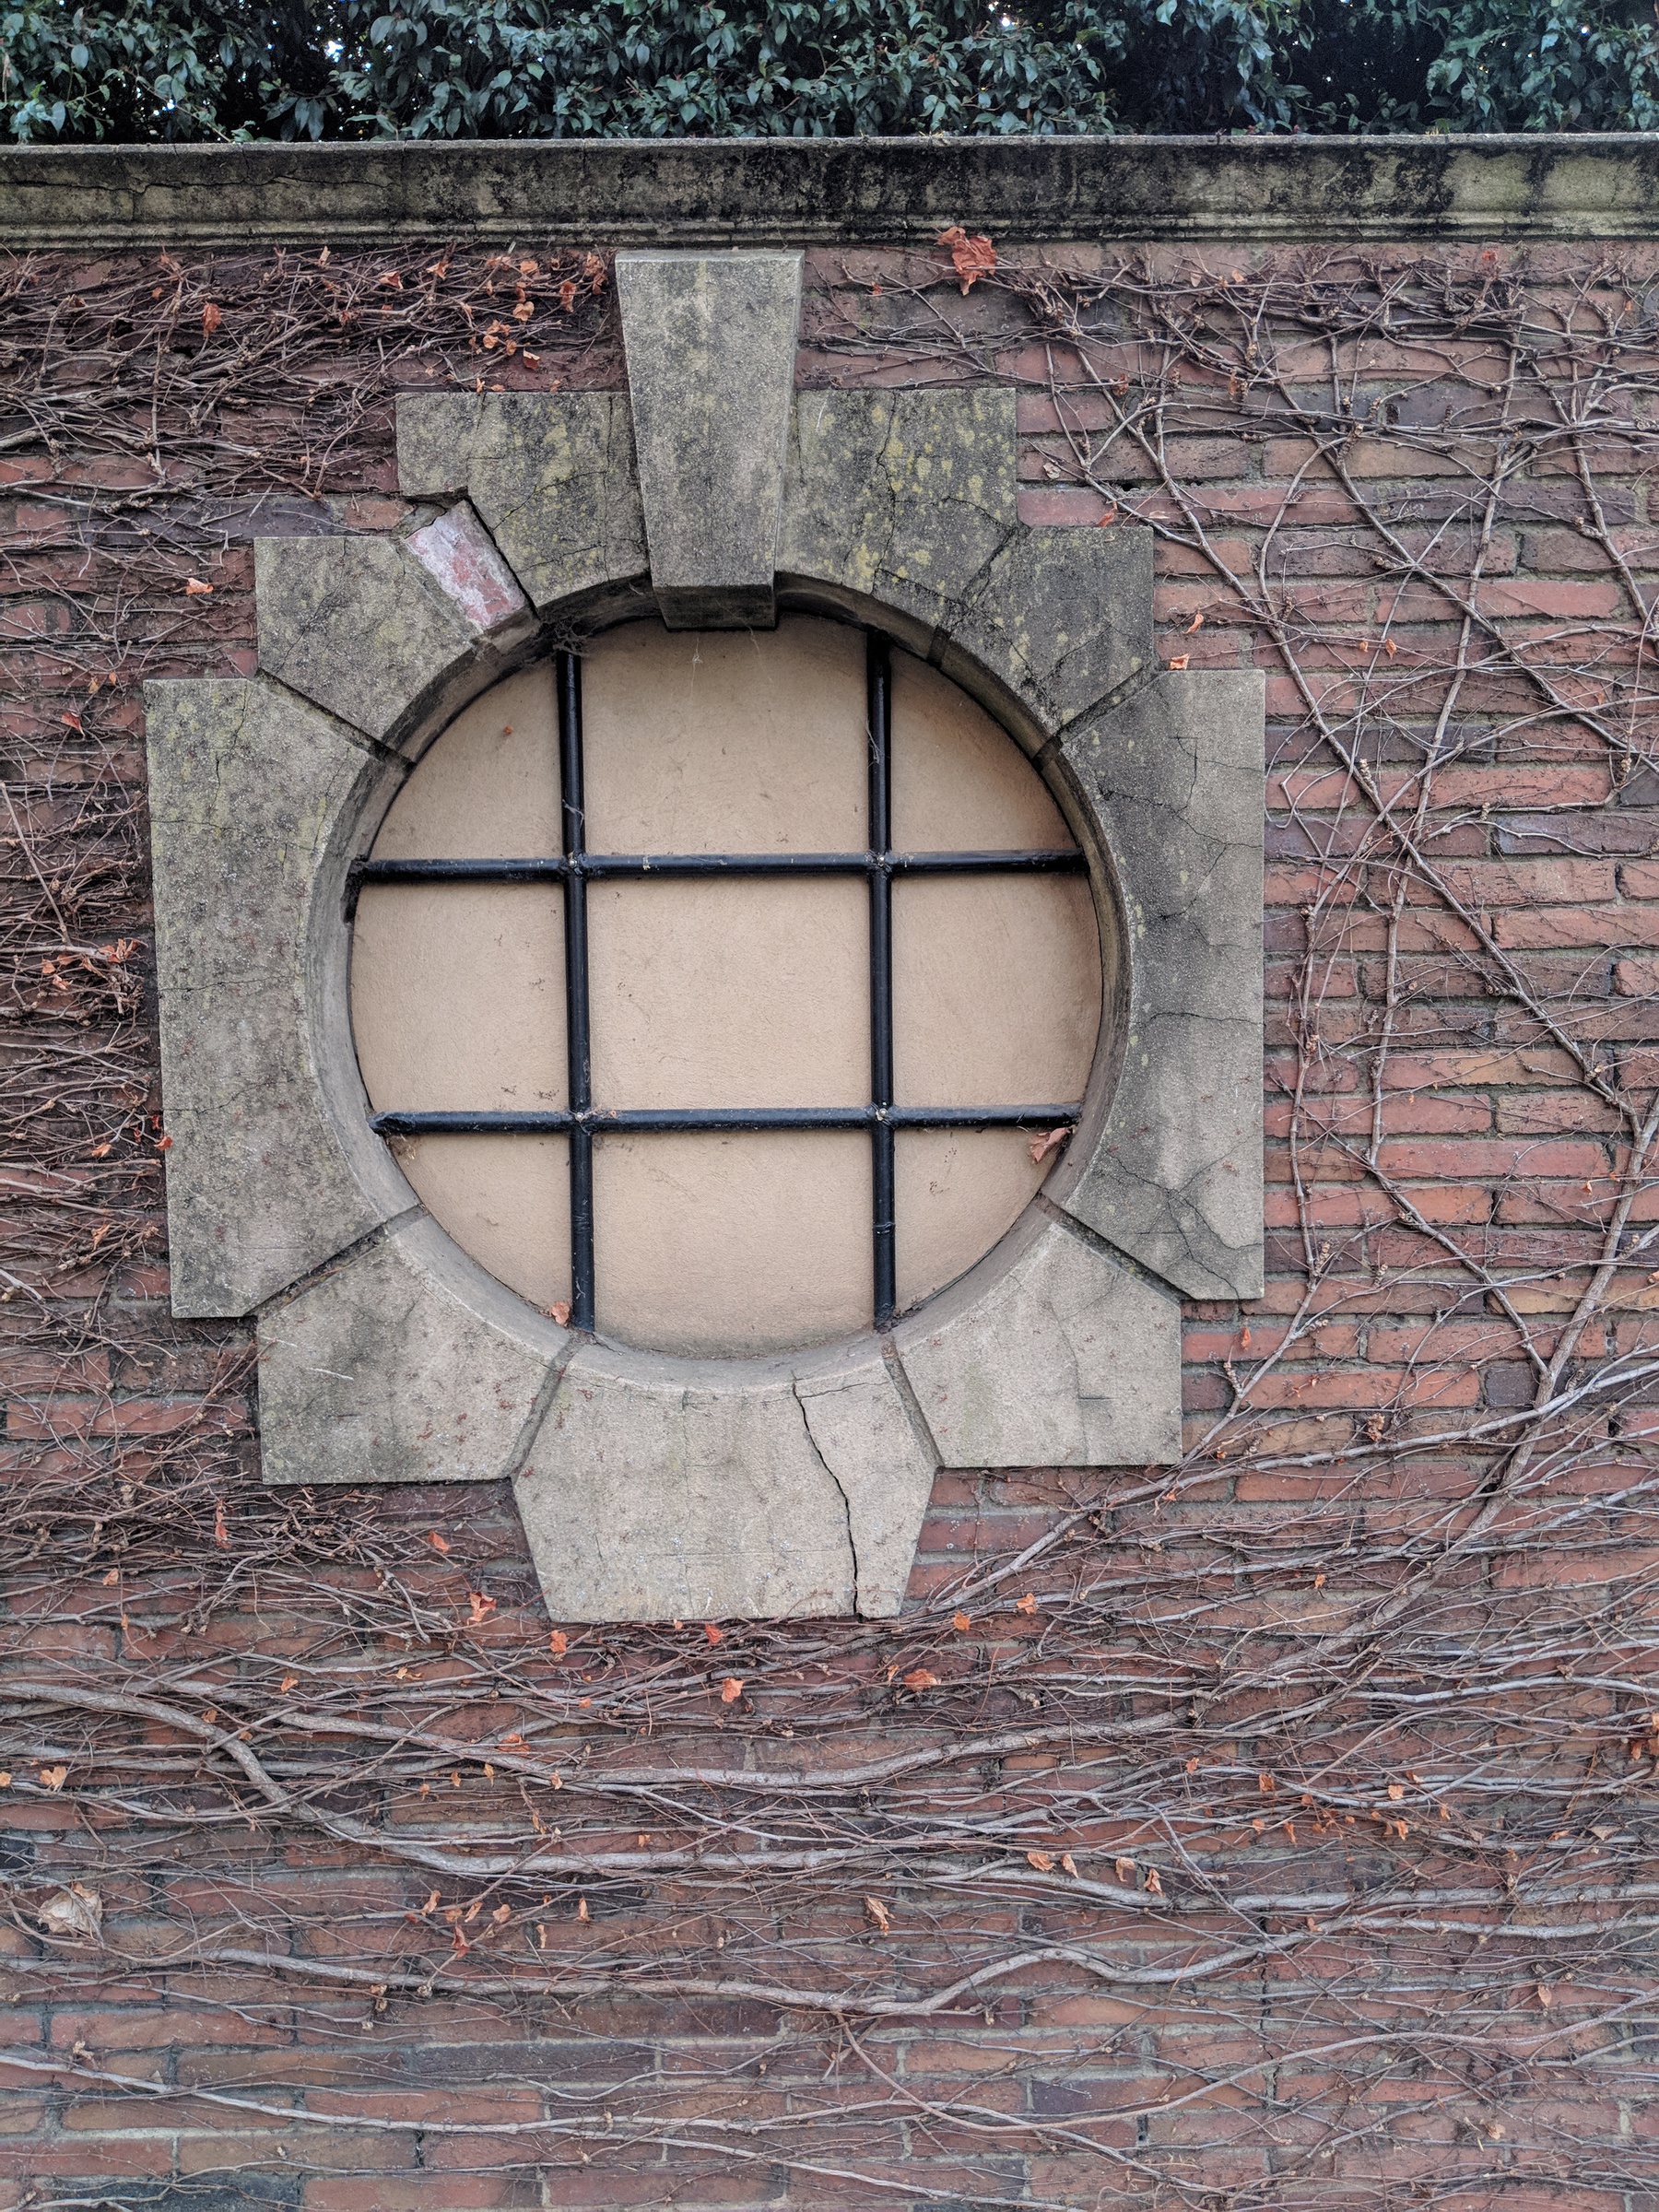 A window in a red brick wall. There is a crack here, but it's small and subtle. Branches of ivy grow on the wall around, and they are currently leafless and bare. One branch of ivy has grown up around the bottom and up the side of the window to half-encircle it.